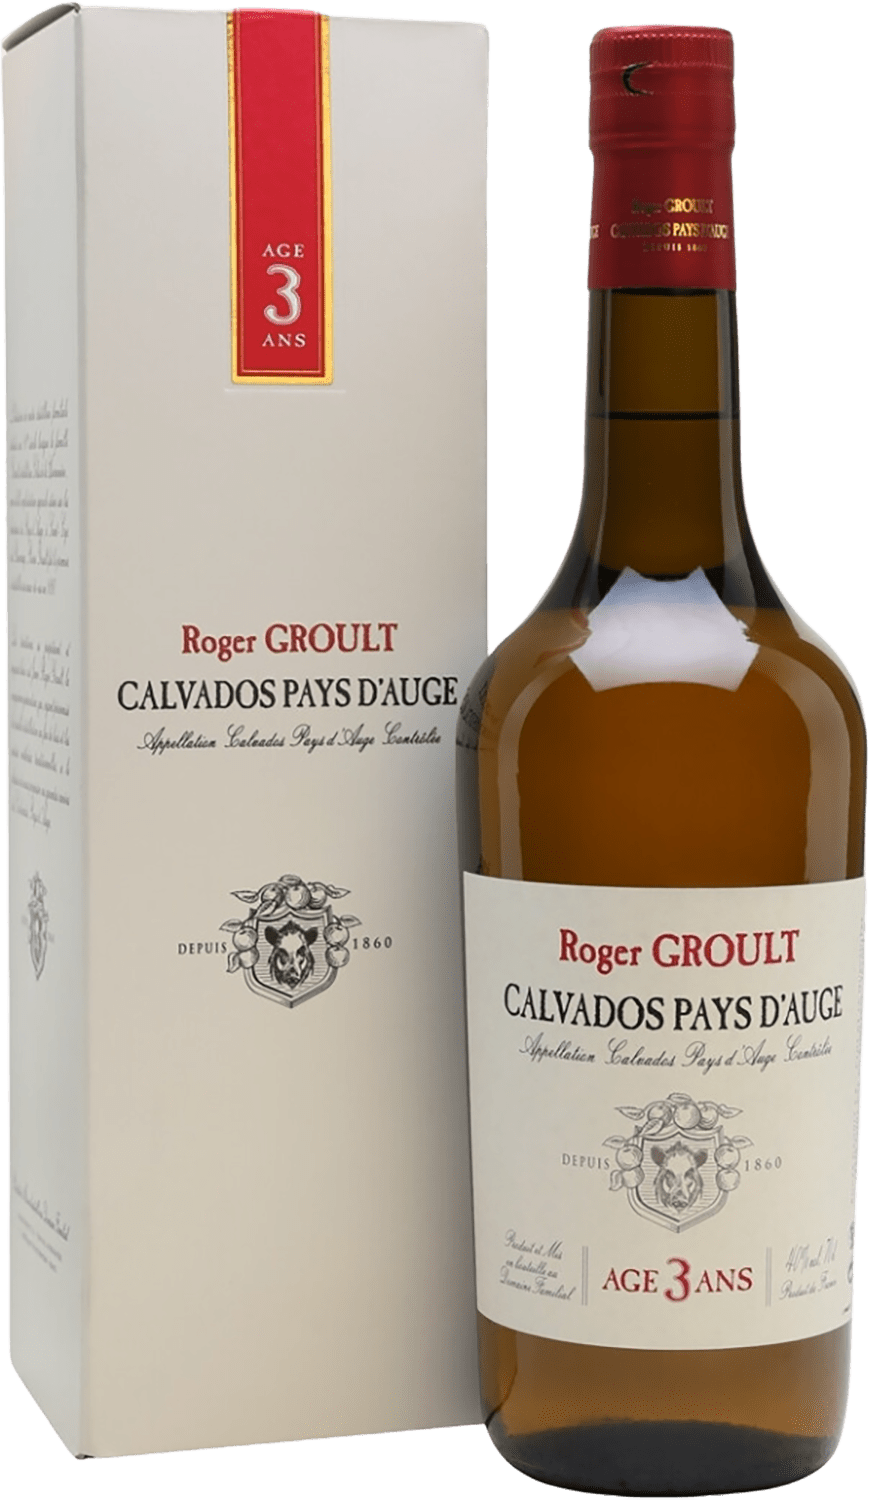 Calvados Pays D'Auge AOC 3 ans Roger Groult (gift box) age d or calvados pays d auge aoc roger groult gift box